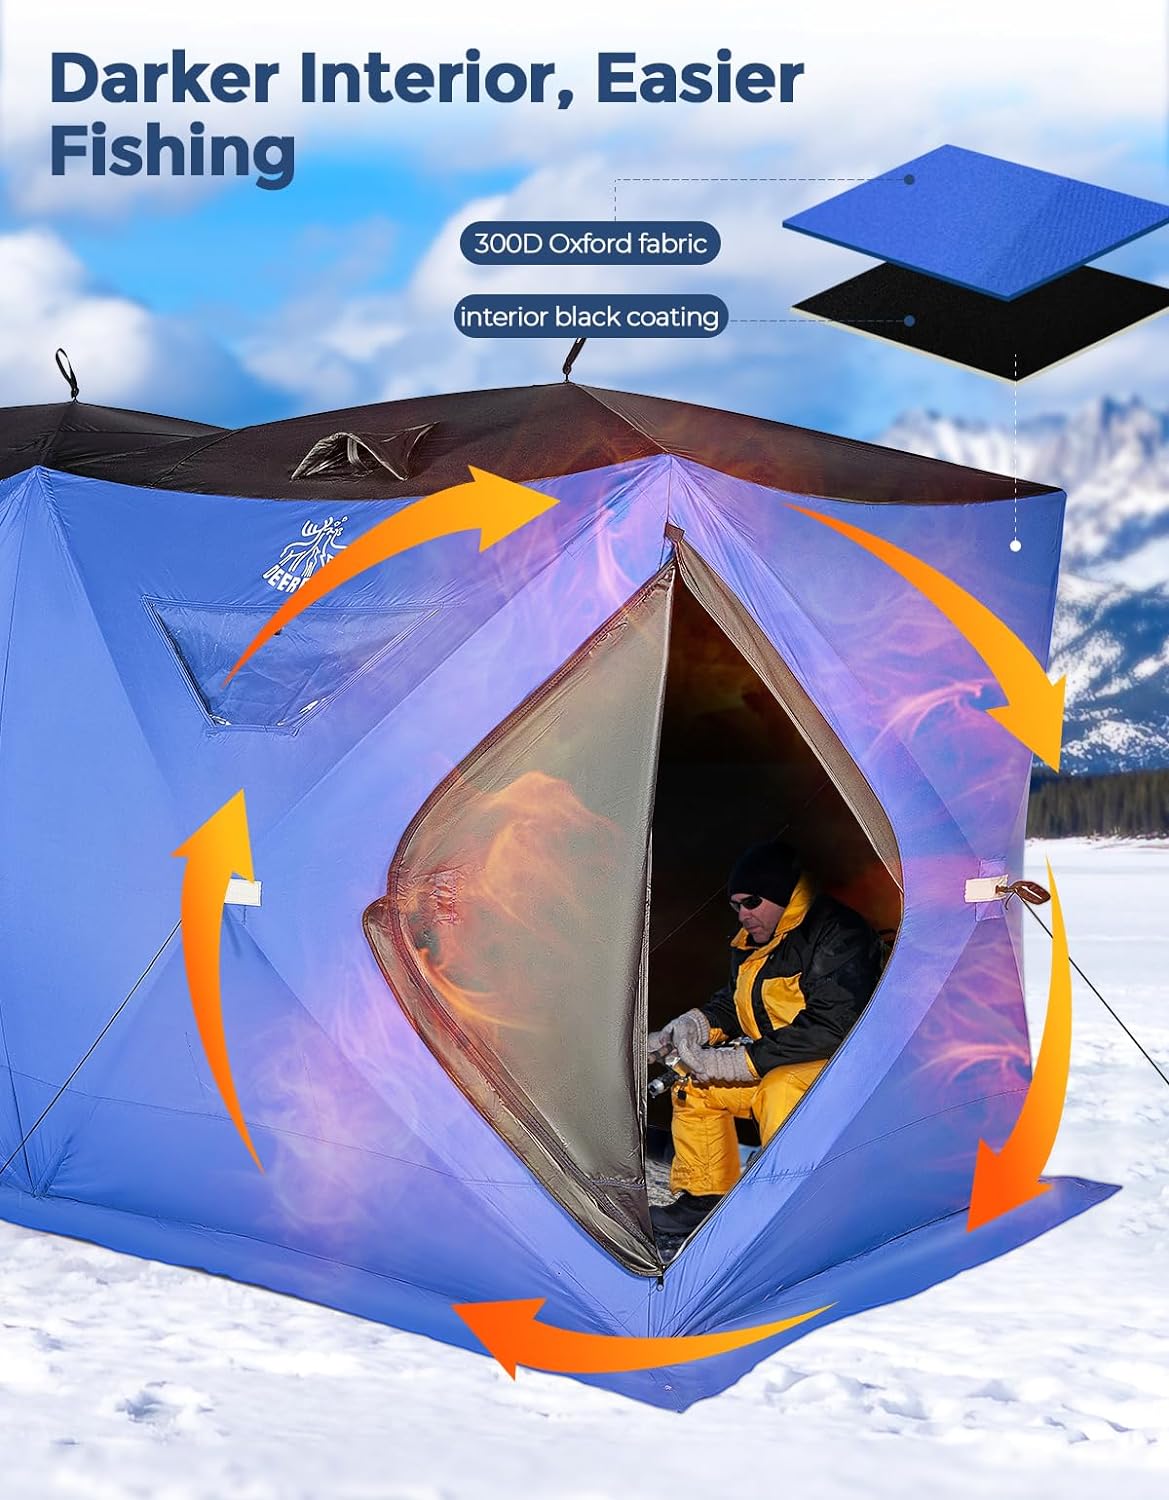 DEERFAMY Ice Fishing Shelter, 3/4/6/8 Person Ice Fishing Tent